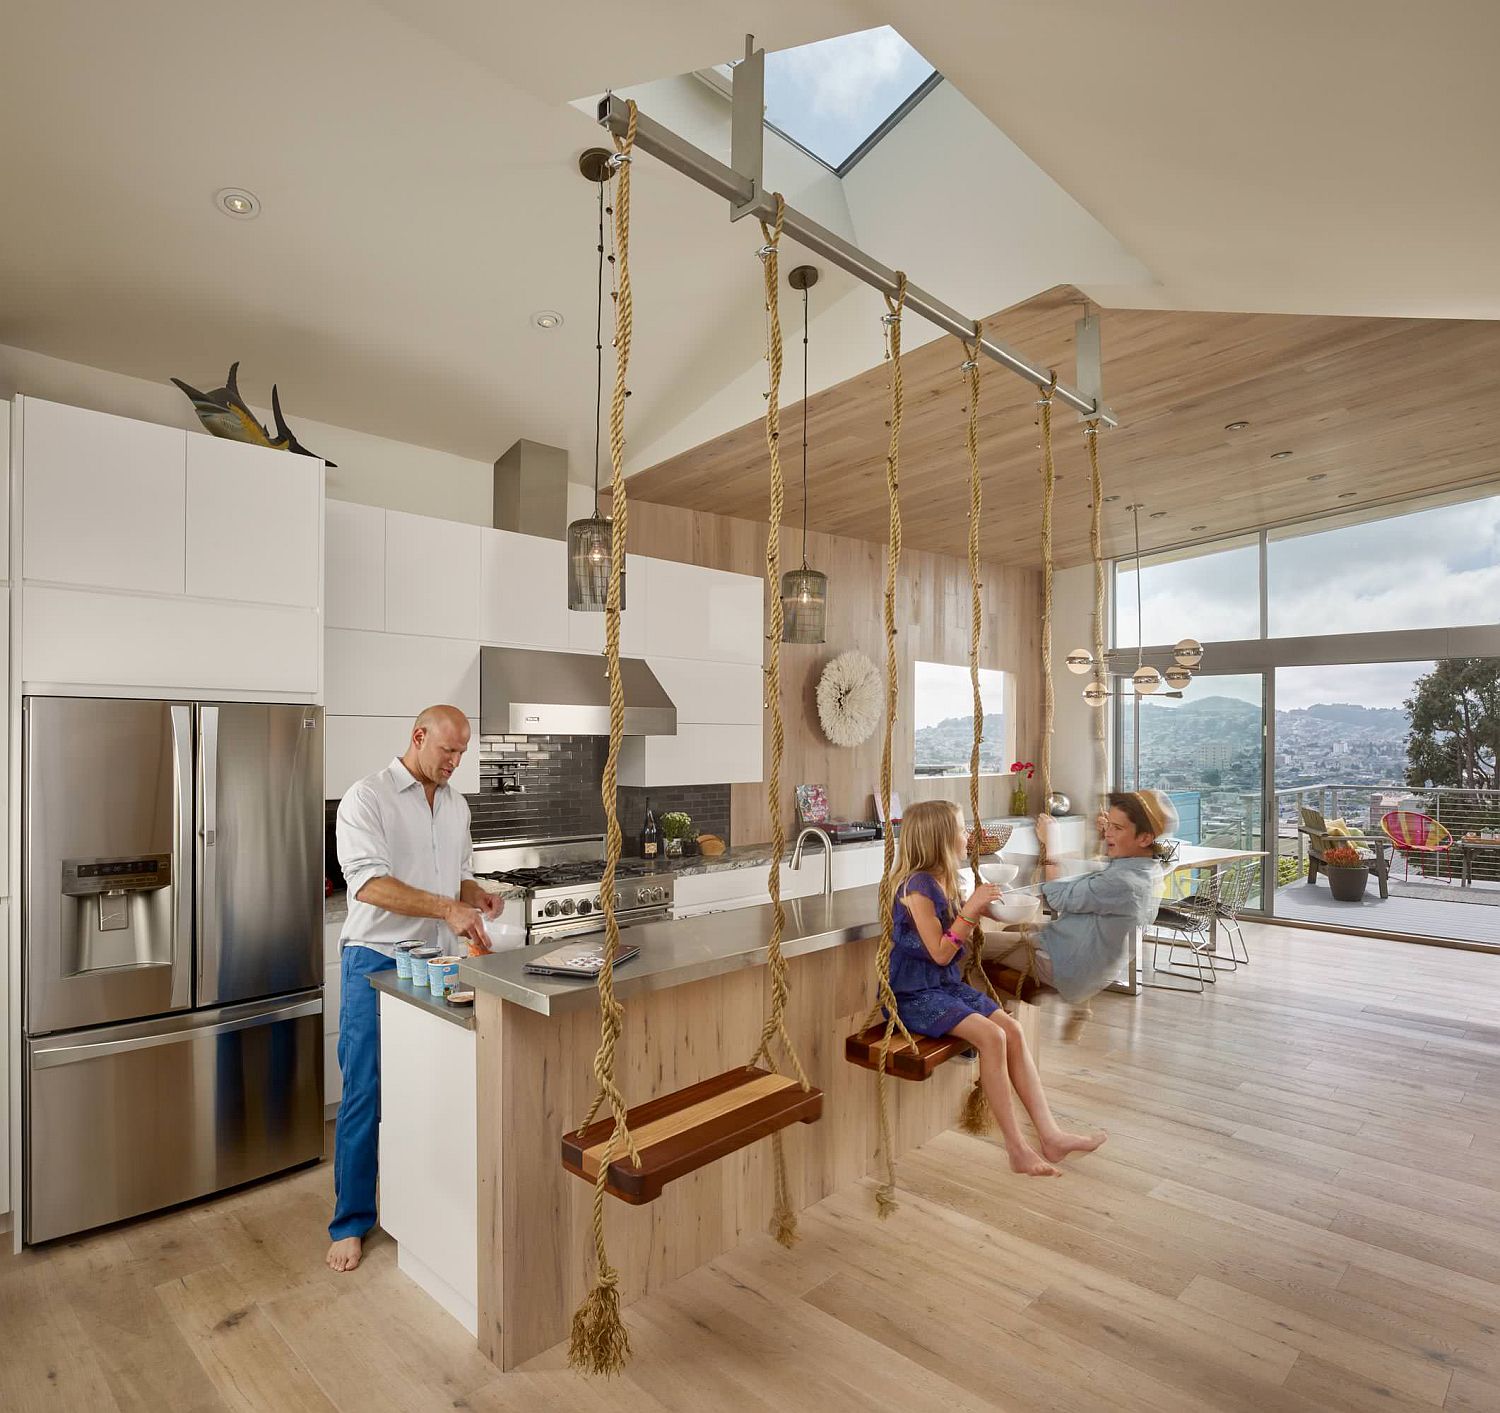 Swing seats suspended from the ceiling along with skylight and lovely views give this kitchen a refreshingly fun appeal